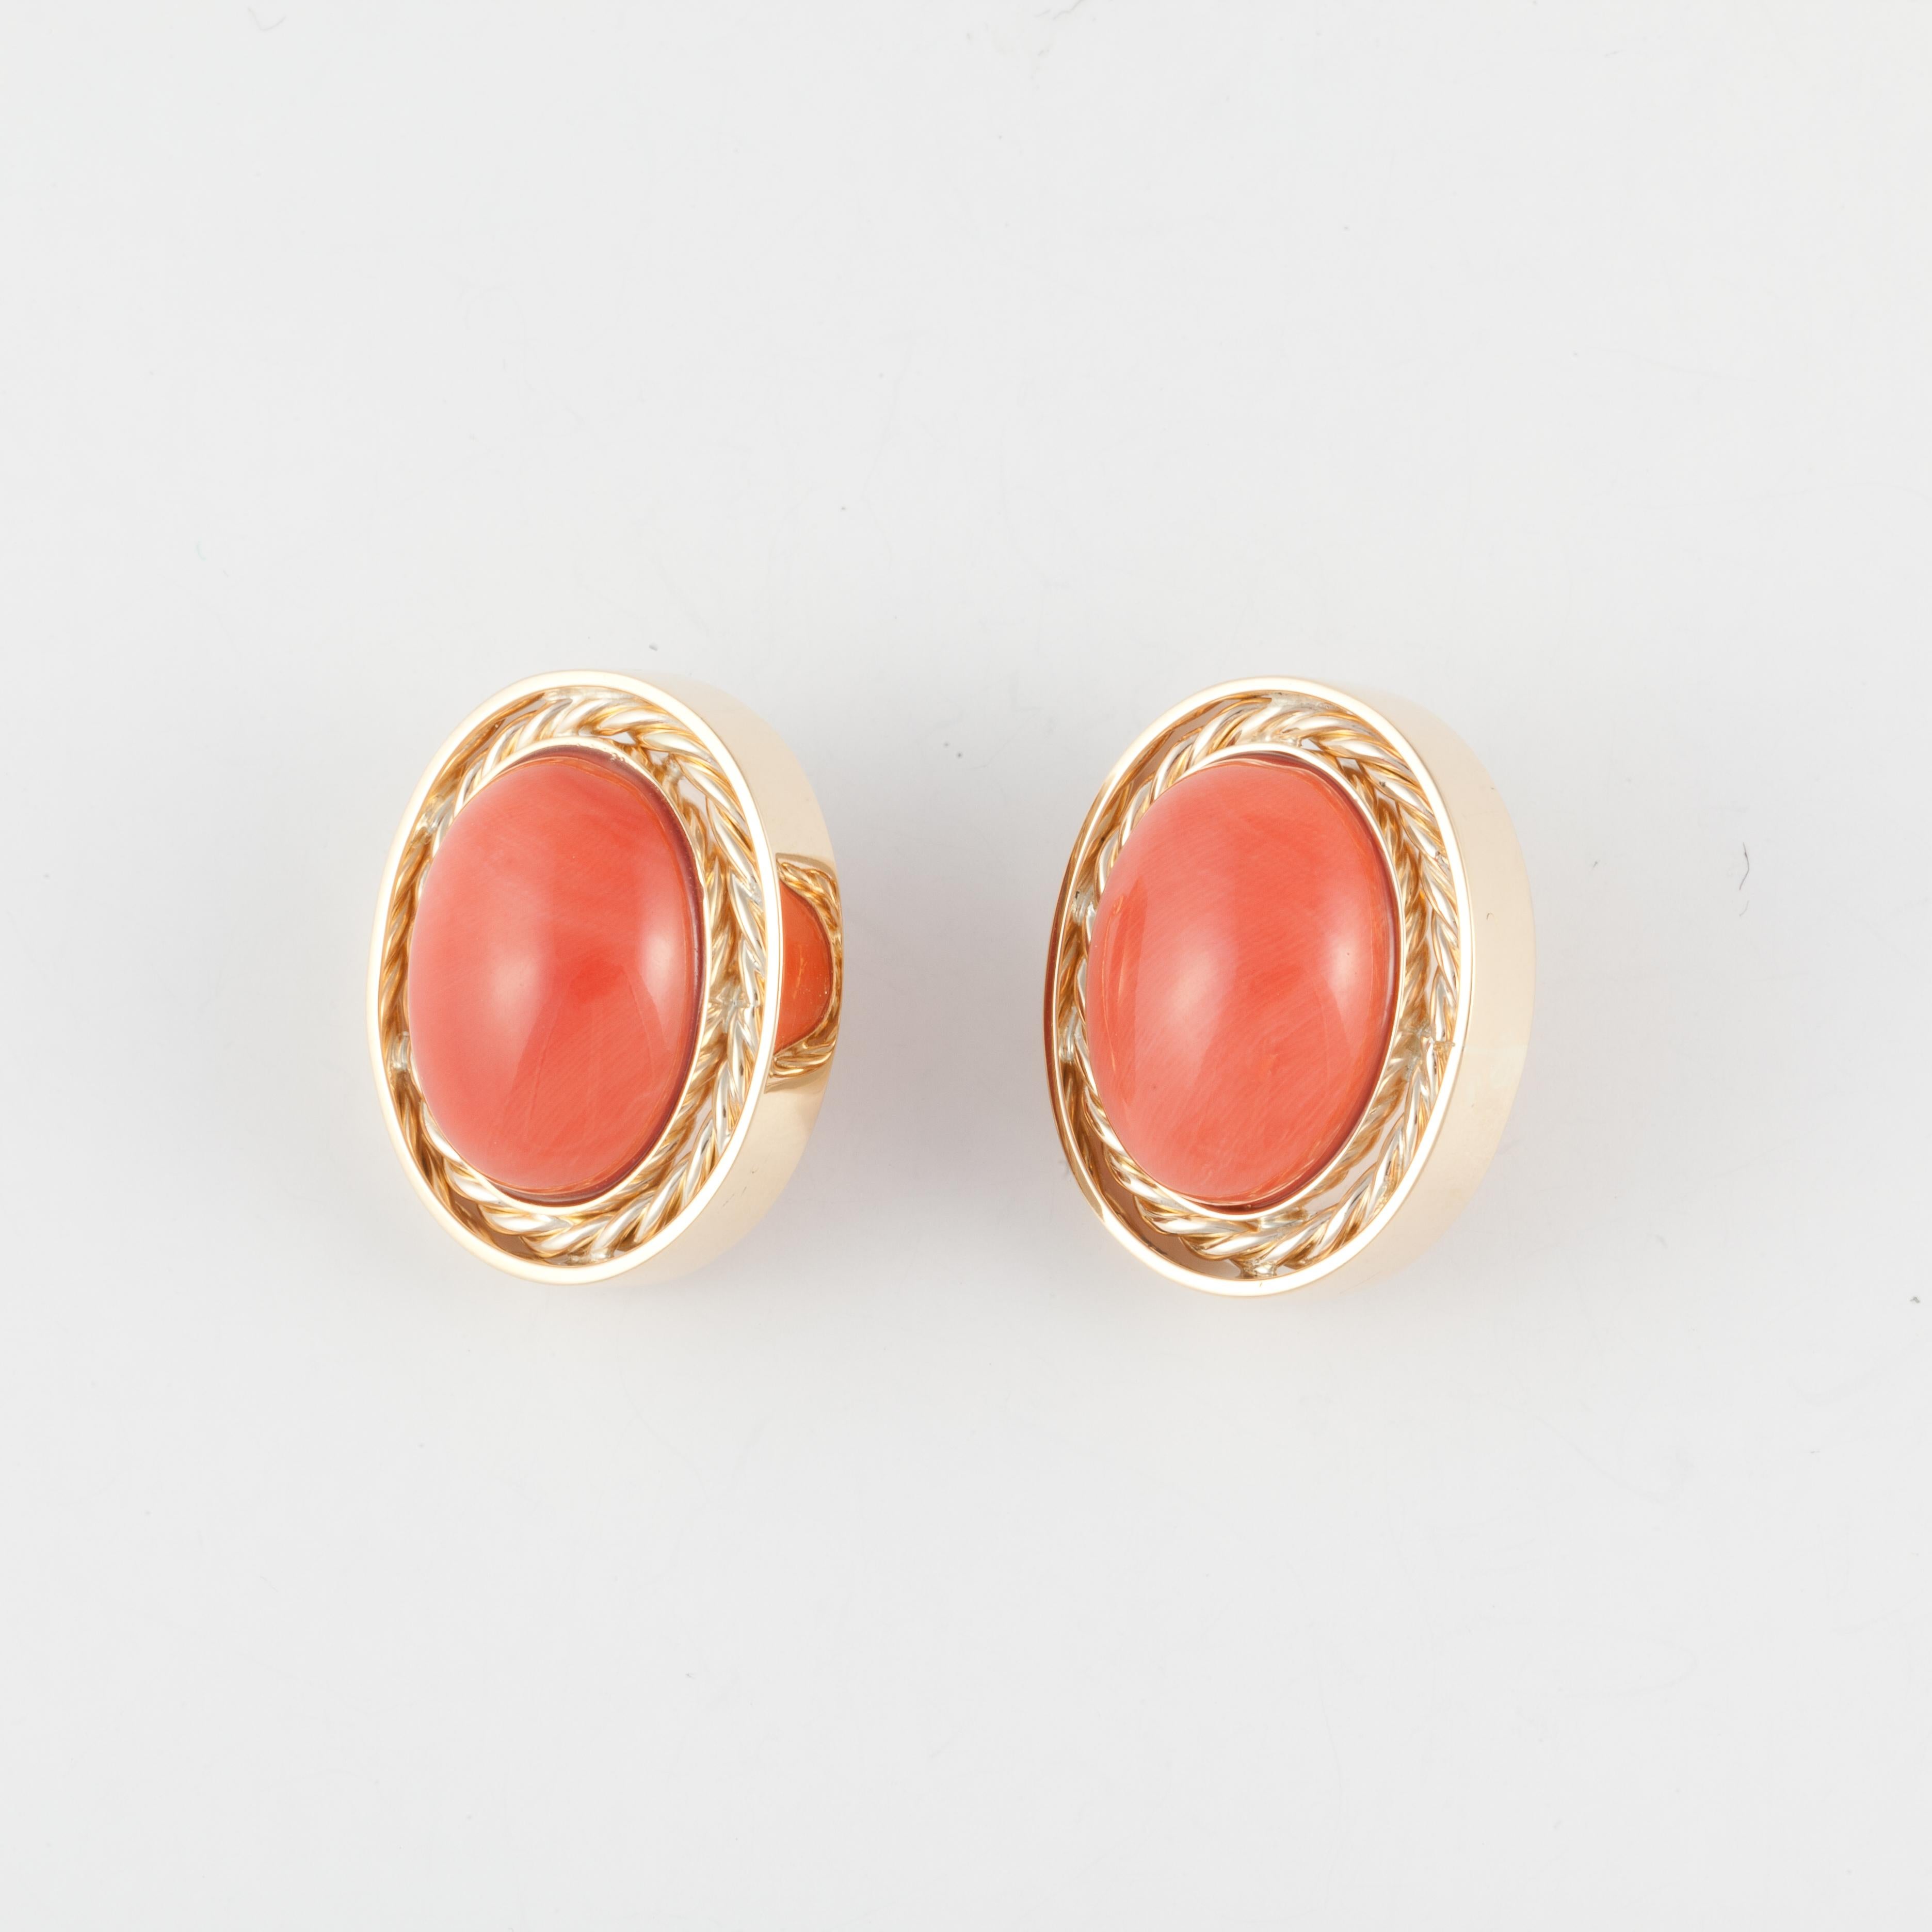 14K yellow gold earrings featuring an oval shaped coral stone framed by a rope design.  They measure 1 1/8 inches long by 7/8 inches wide and are a clip style.  